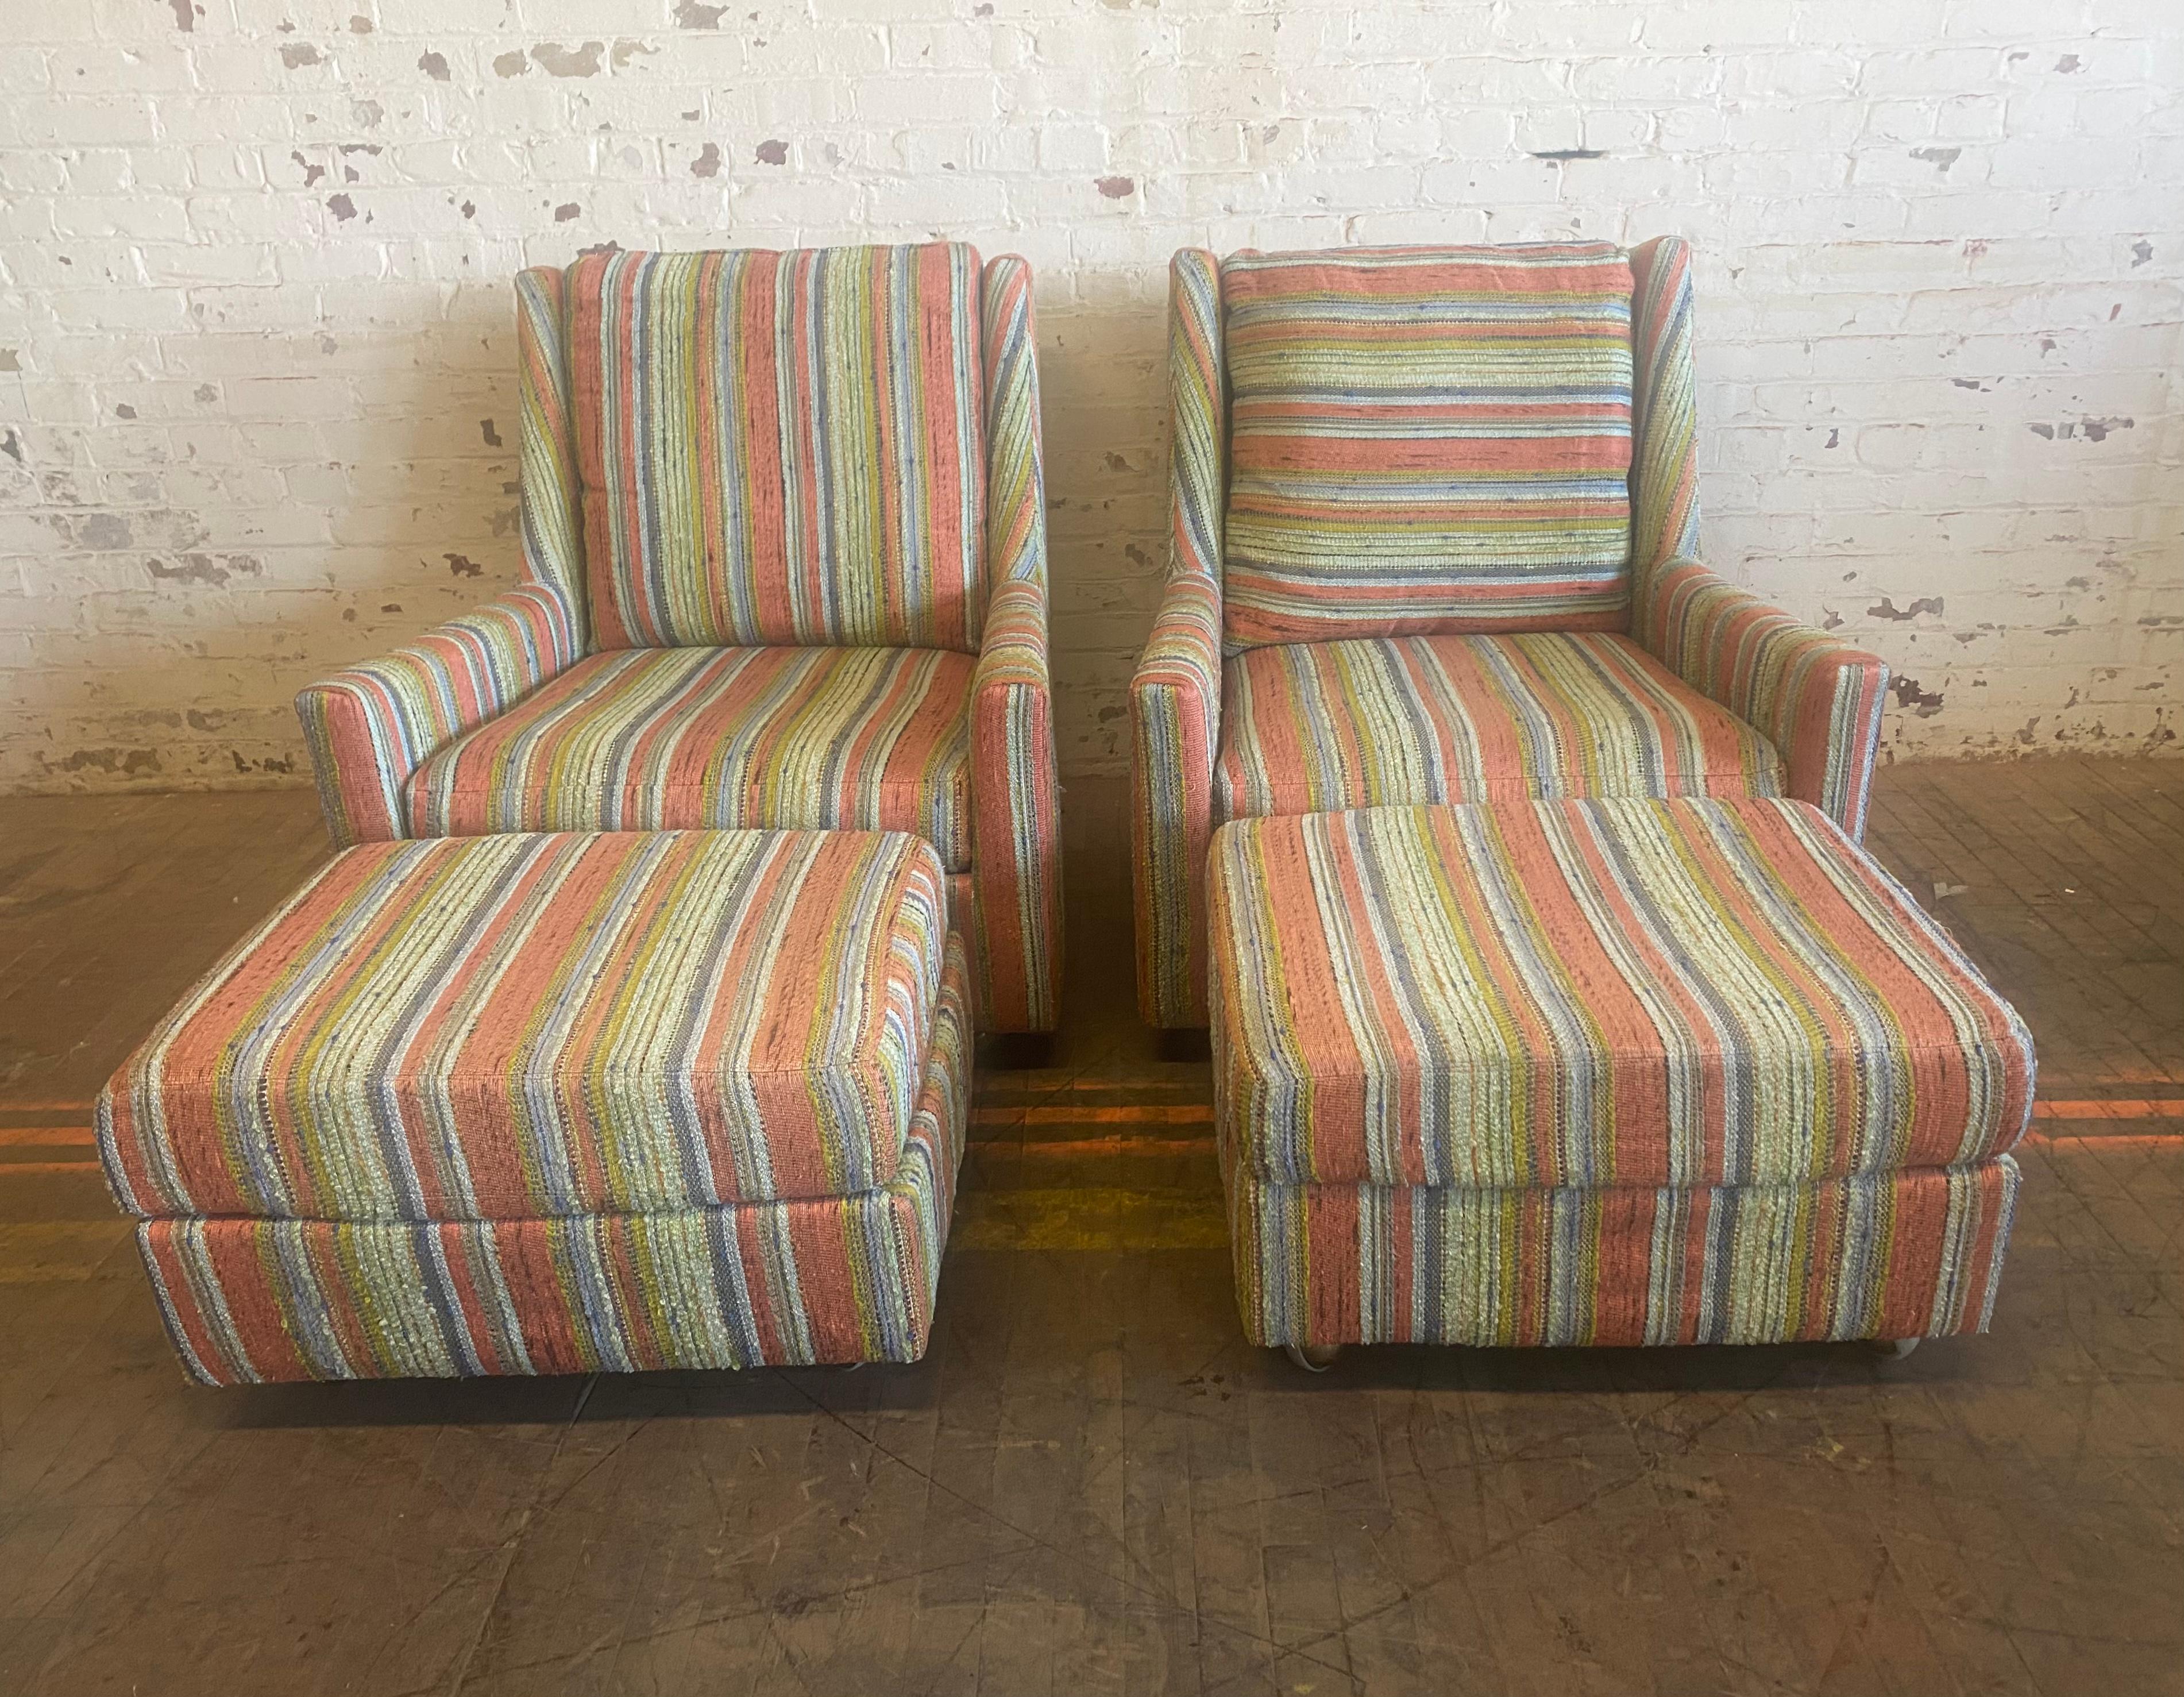 Matched Pair Lounge Chairs/ Ottomans Maharam, Alexander Girard Stripe Fabric For Sale 1